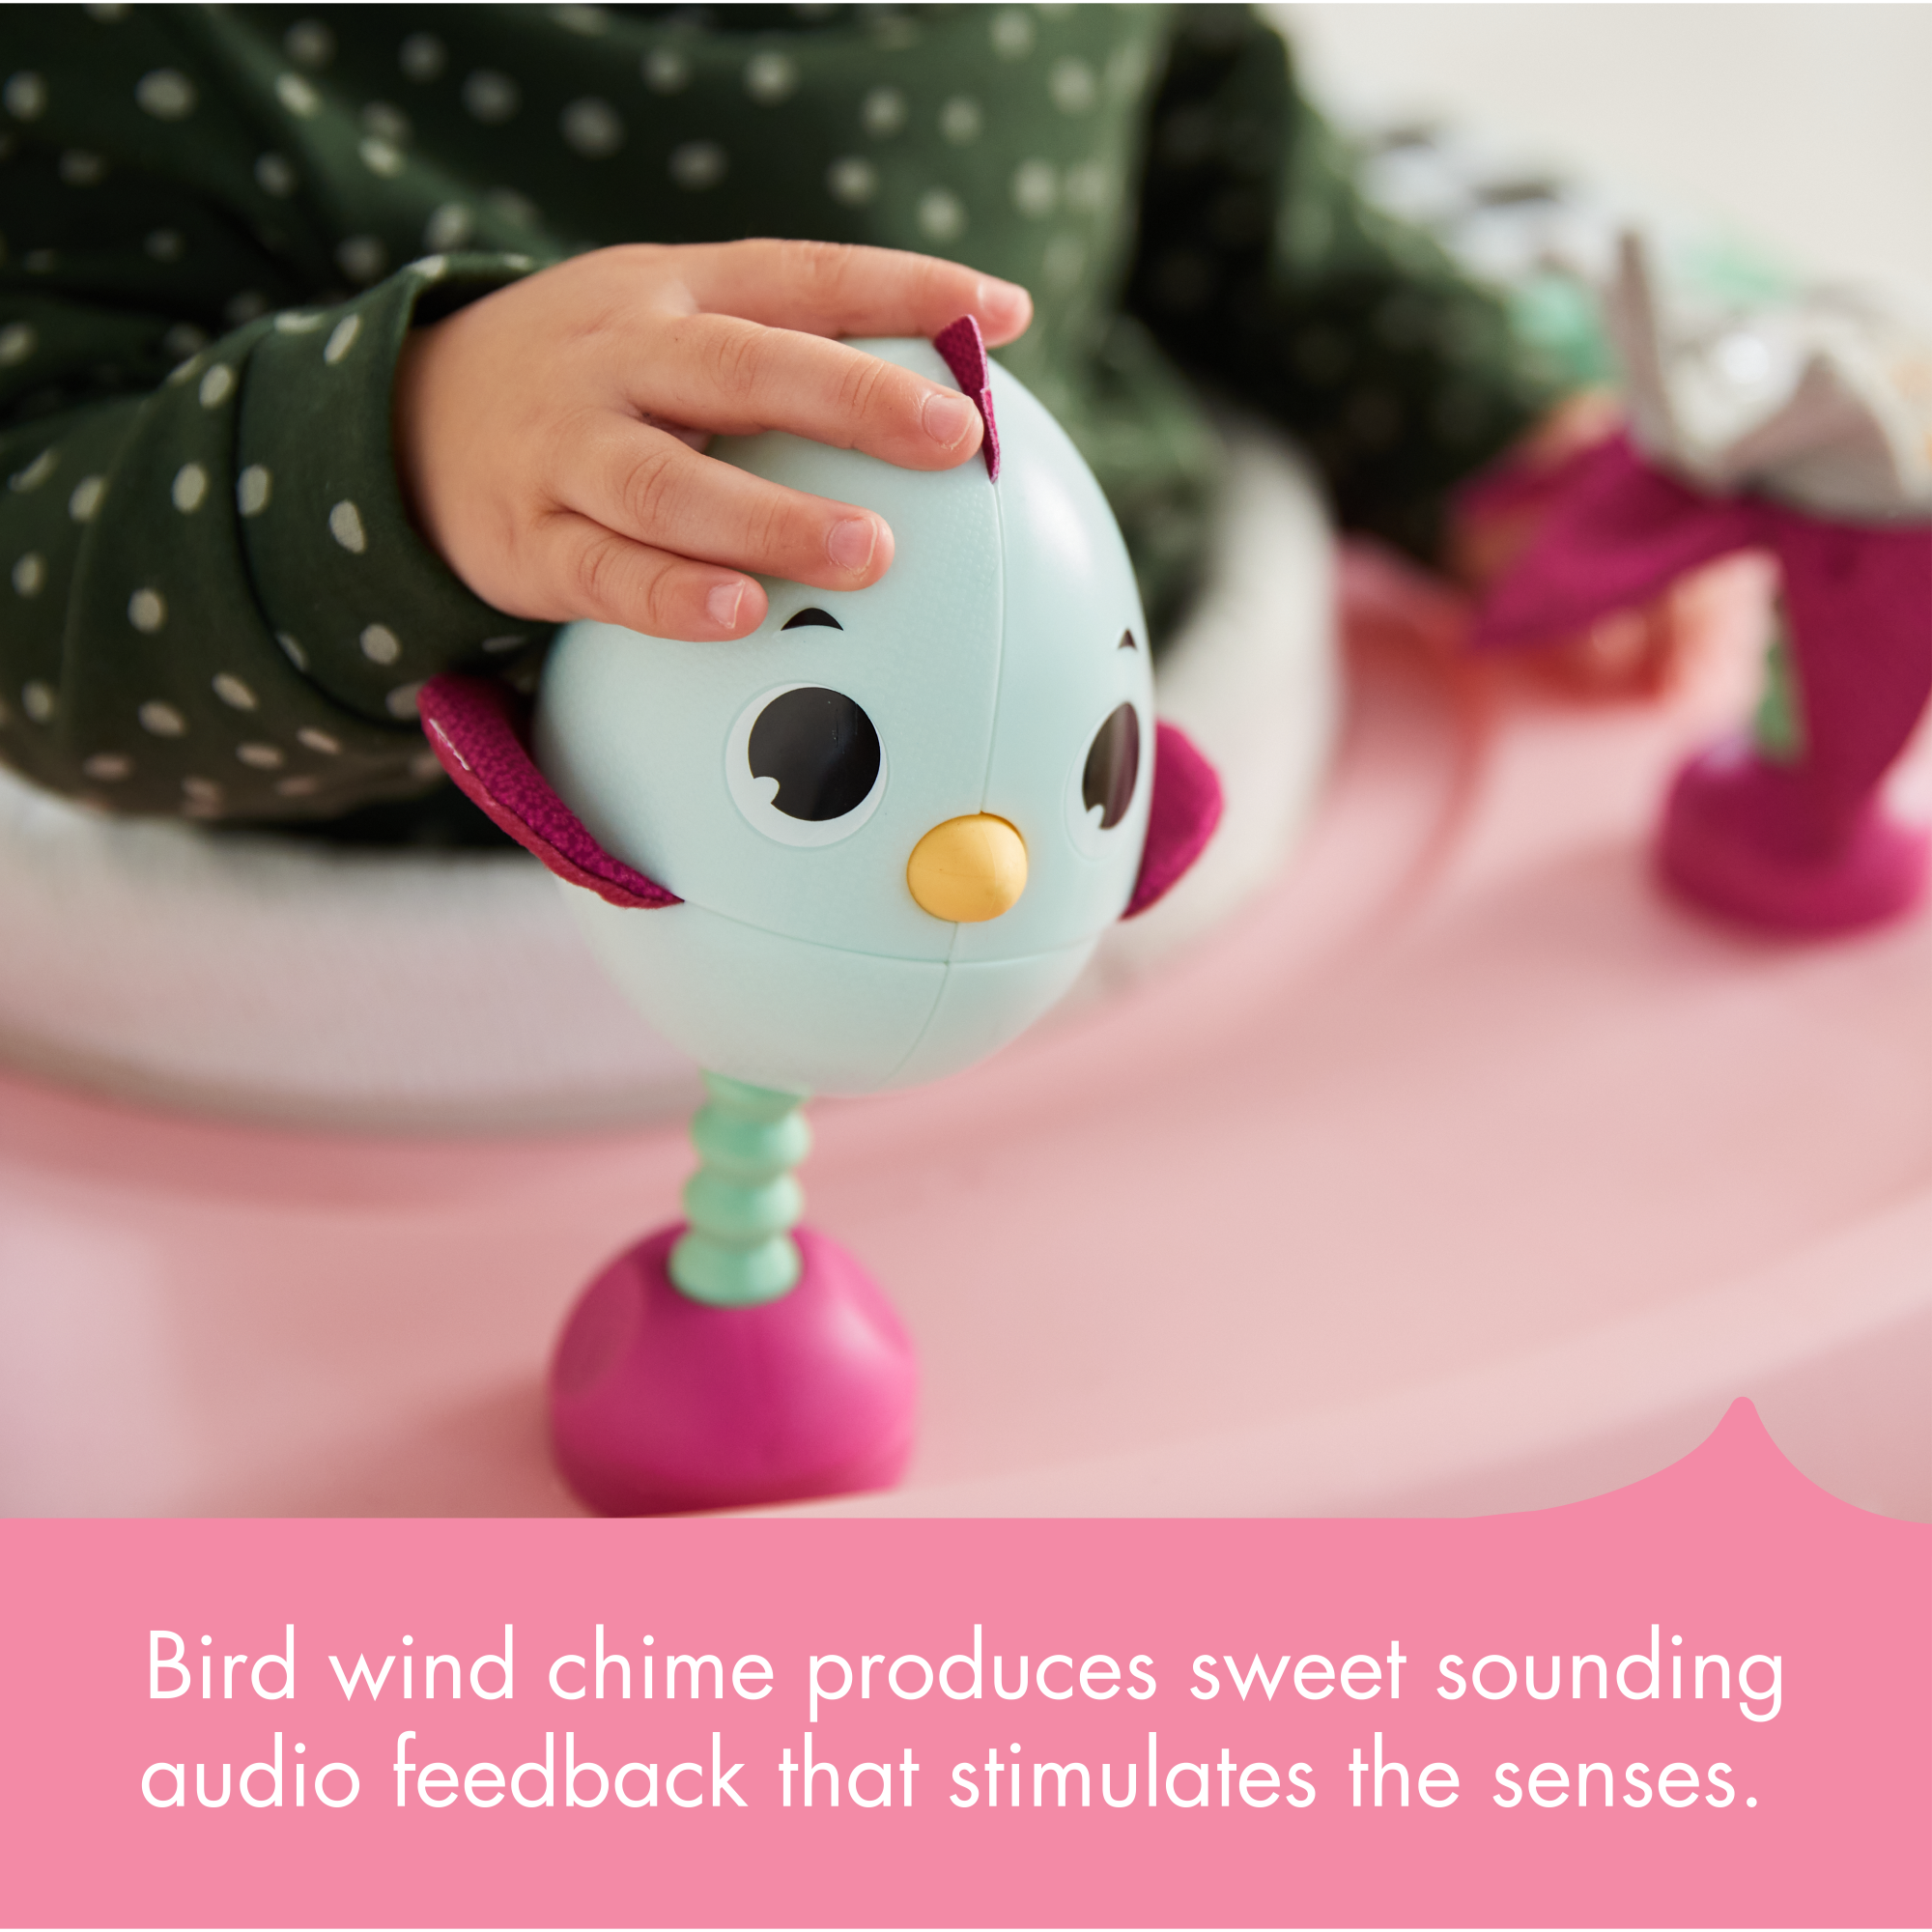 Tiny Love 5-in-1 Here I Grow Stationary Activity Center - bird wind chime produces sweet sounding audio feedback that stimulates the senses